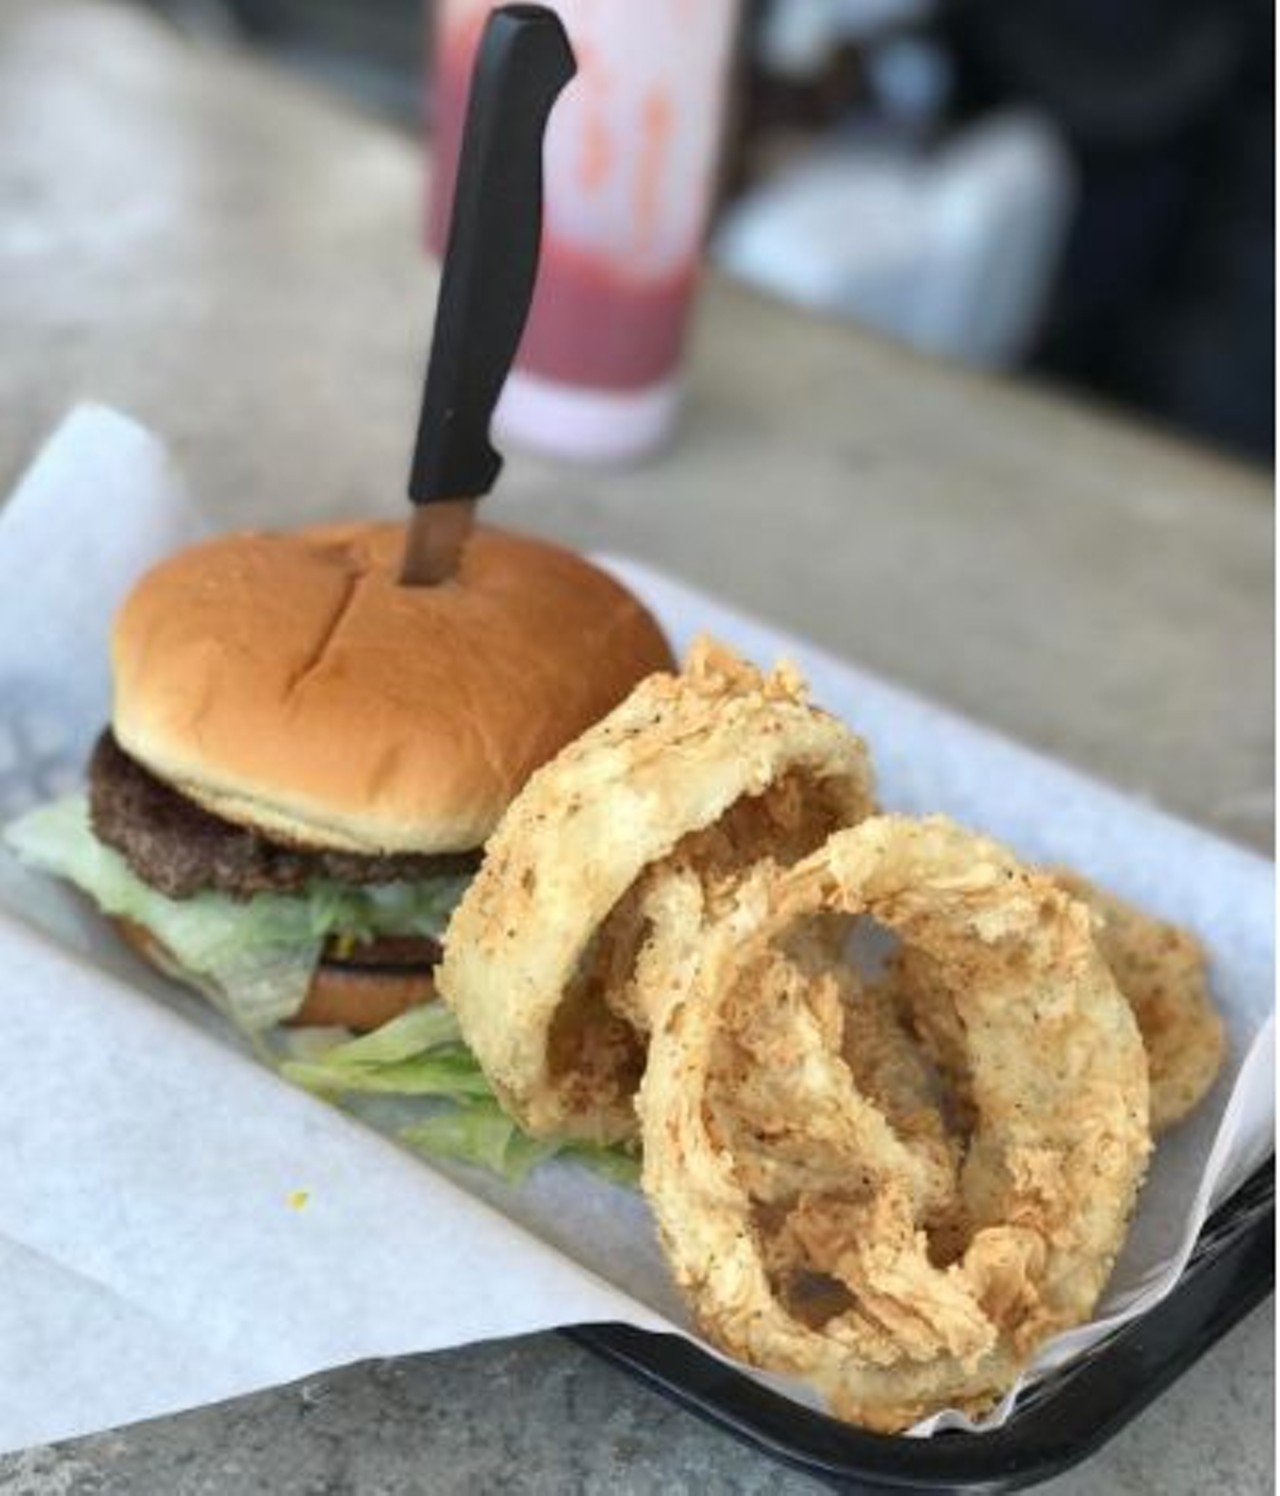 Luther&#146;s Cafe
1503 N Main Ave, (210) 223-7727,
lutherscafe.com
Luther&#146;s serves up this scrumptious signature burger, with the side of golden onion rings. 
Photo via Instagram
rogersaurus_mex
